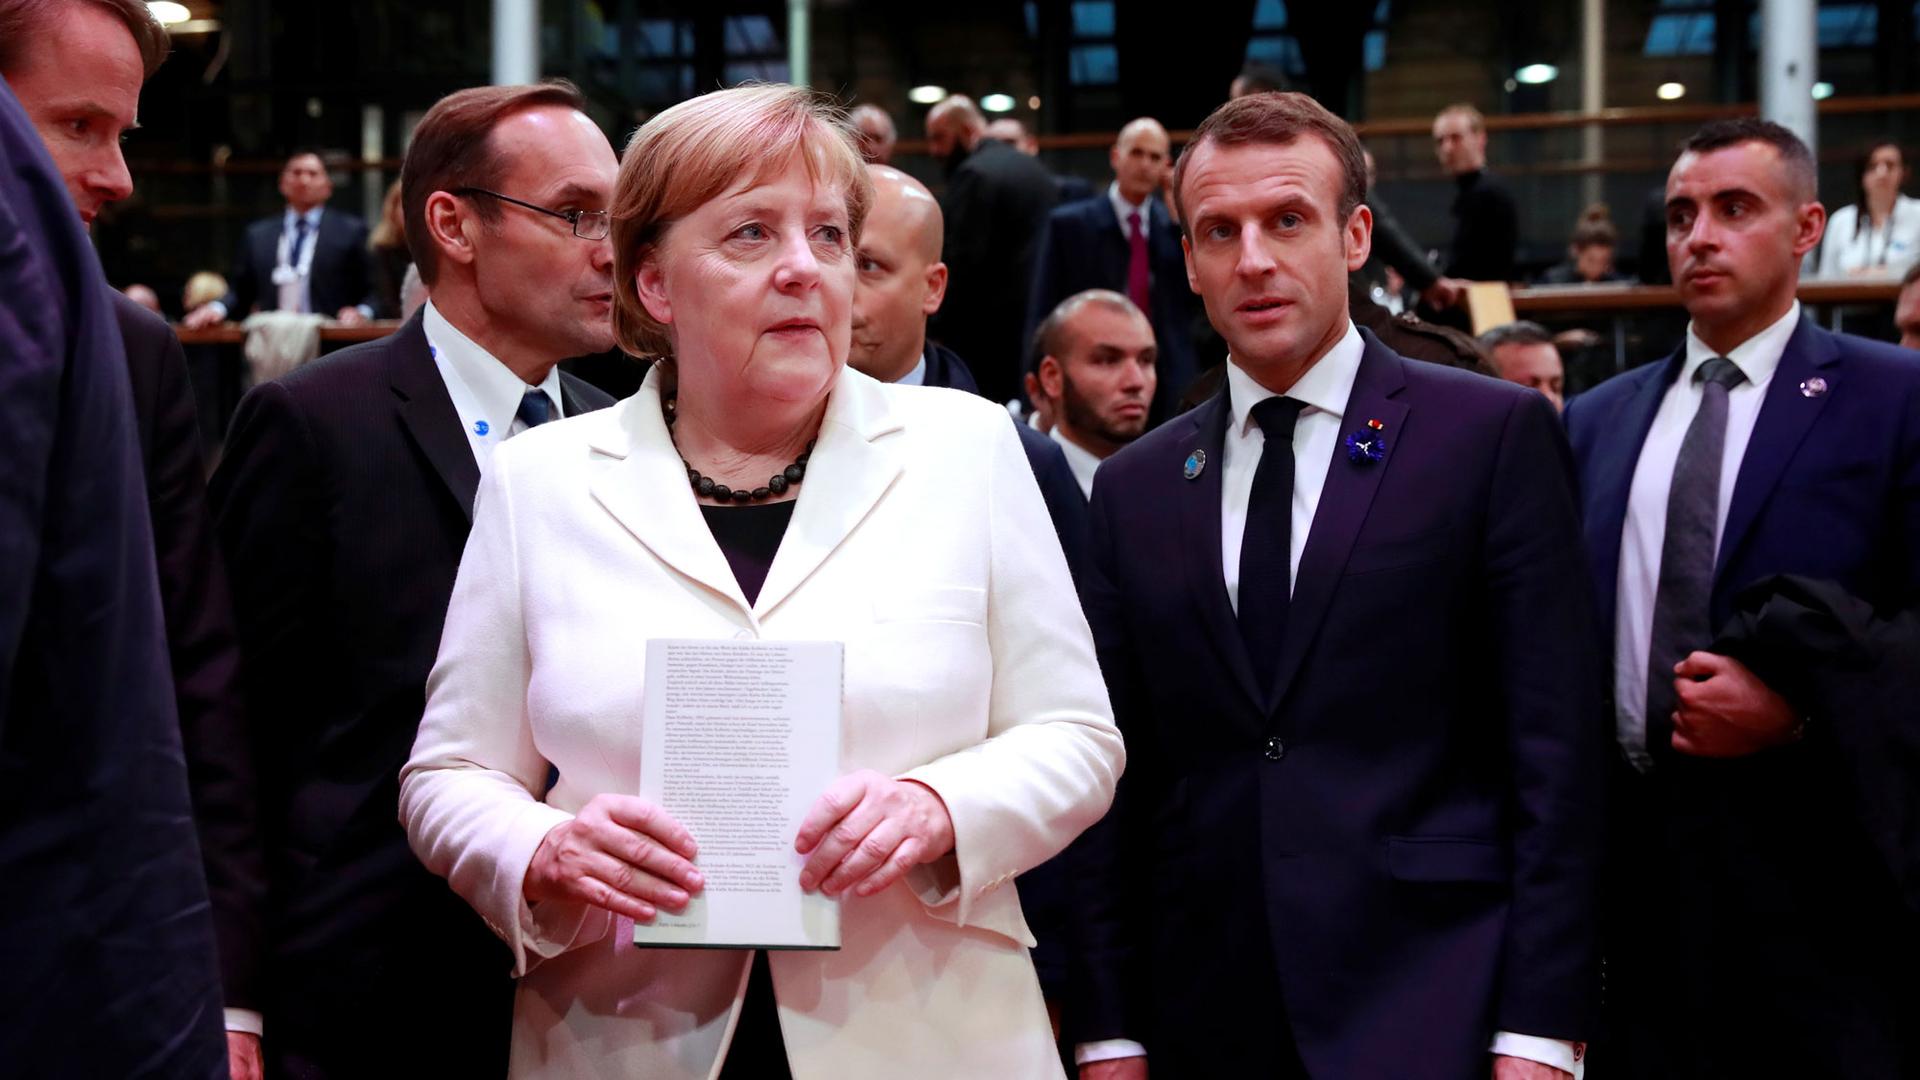 German Chancellor Angela Merkel, wearing a white jacket, and French President Emmanuel Macron, in a dark suit, are shown standing next to each other at the Paris Peace Forum.